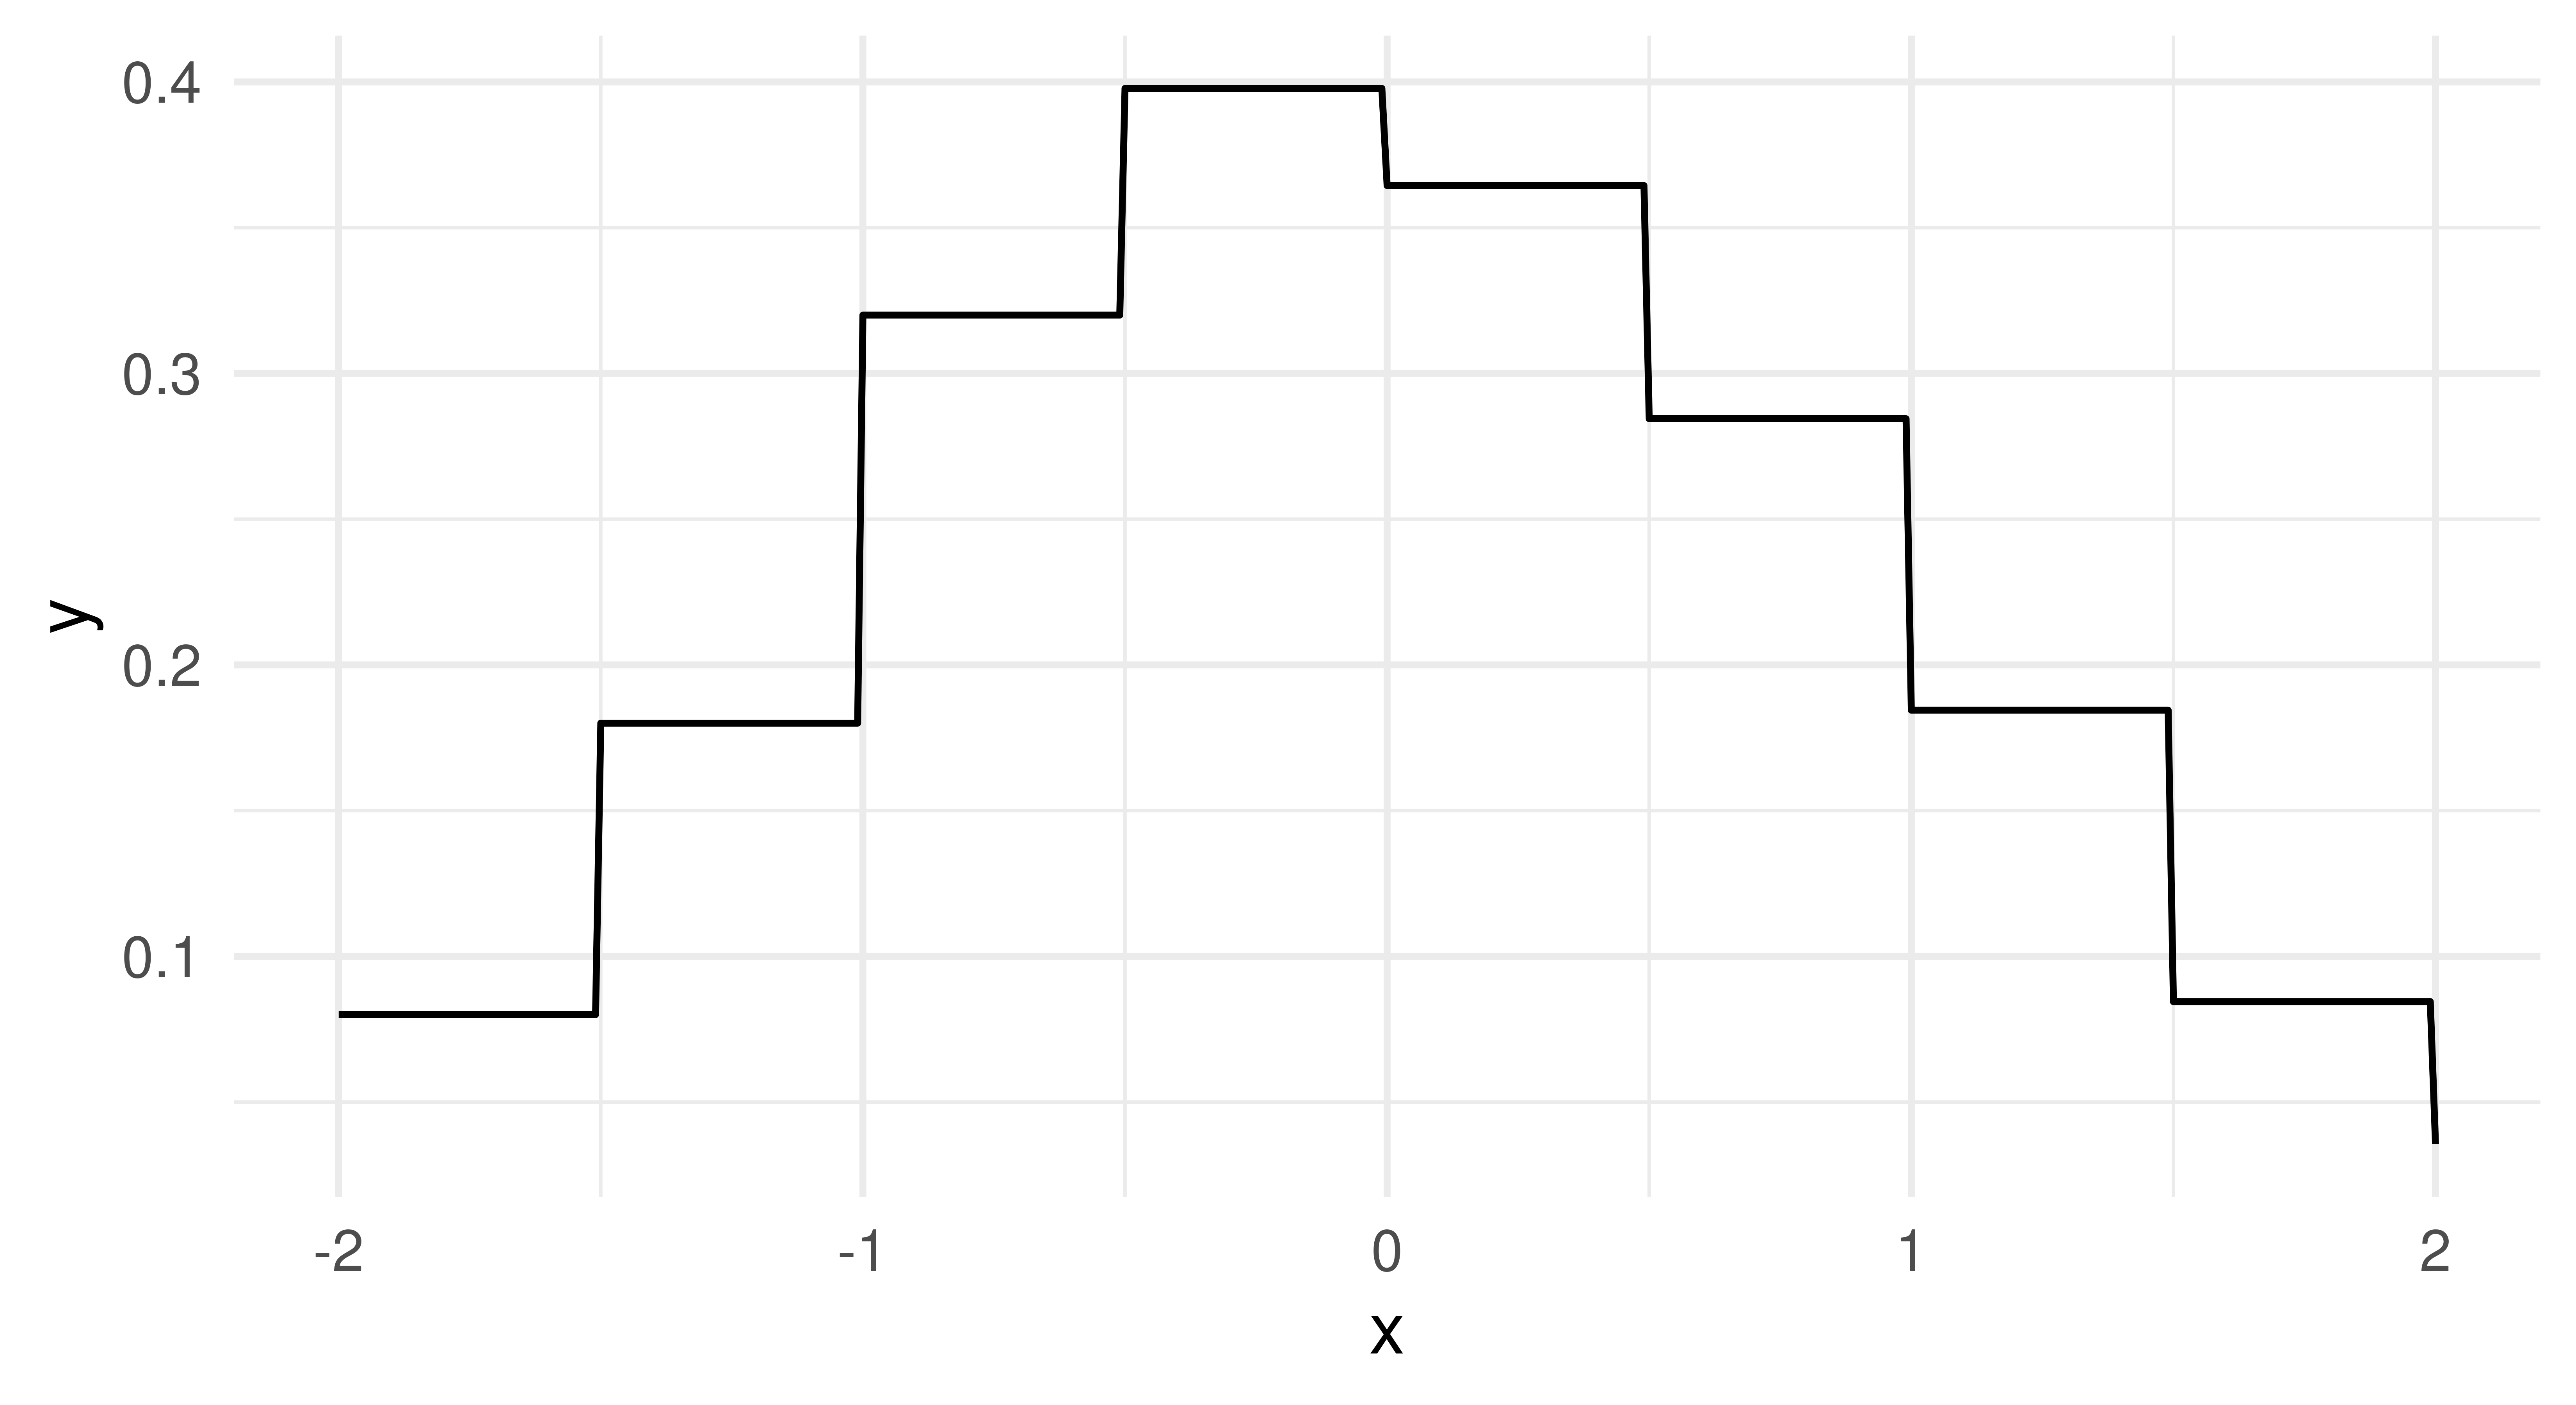 Image shows a line plot with x-axis between (-2,2) and y-axis between (0,0.4). The plot closely resembles a Normal(0, 1) distribution with a peak at 0.4.